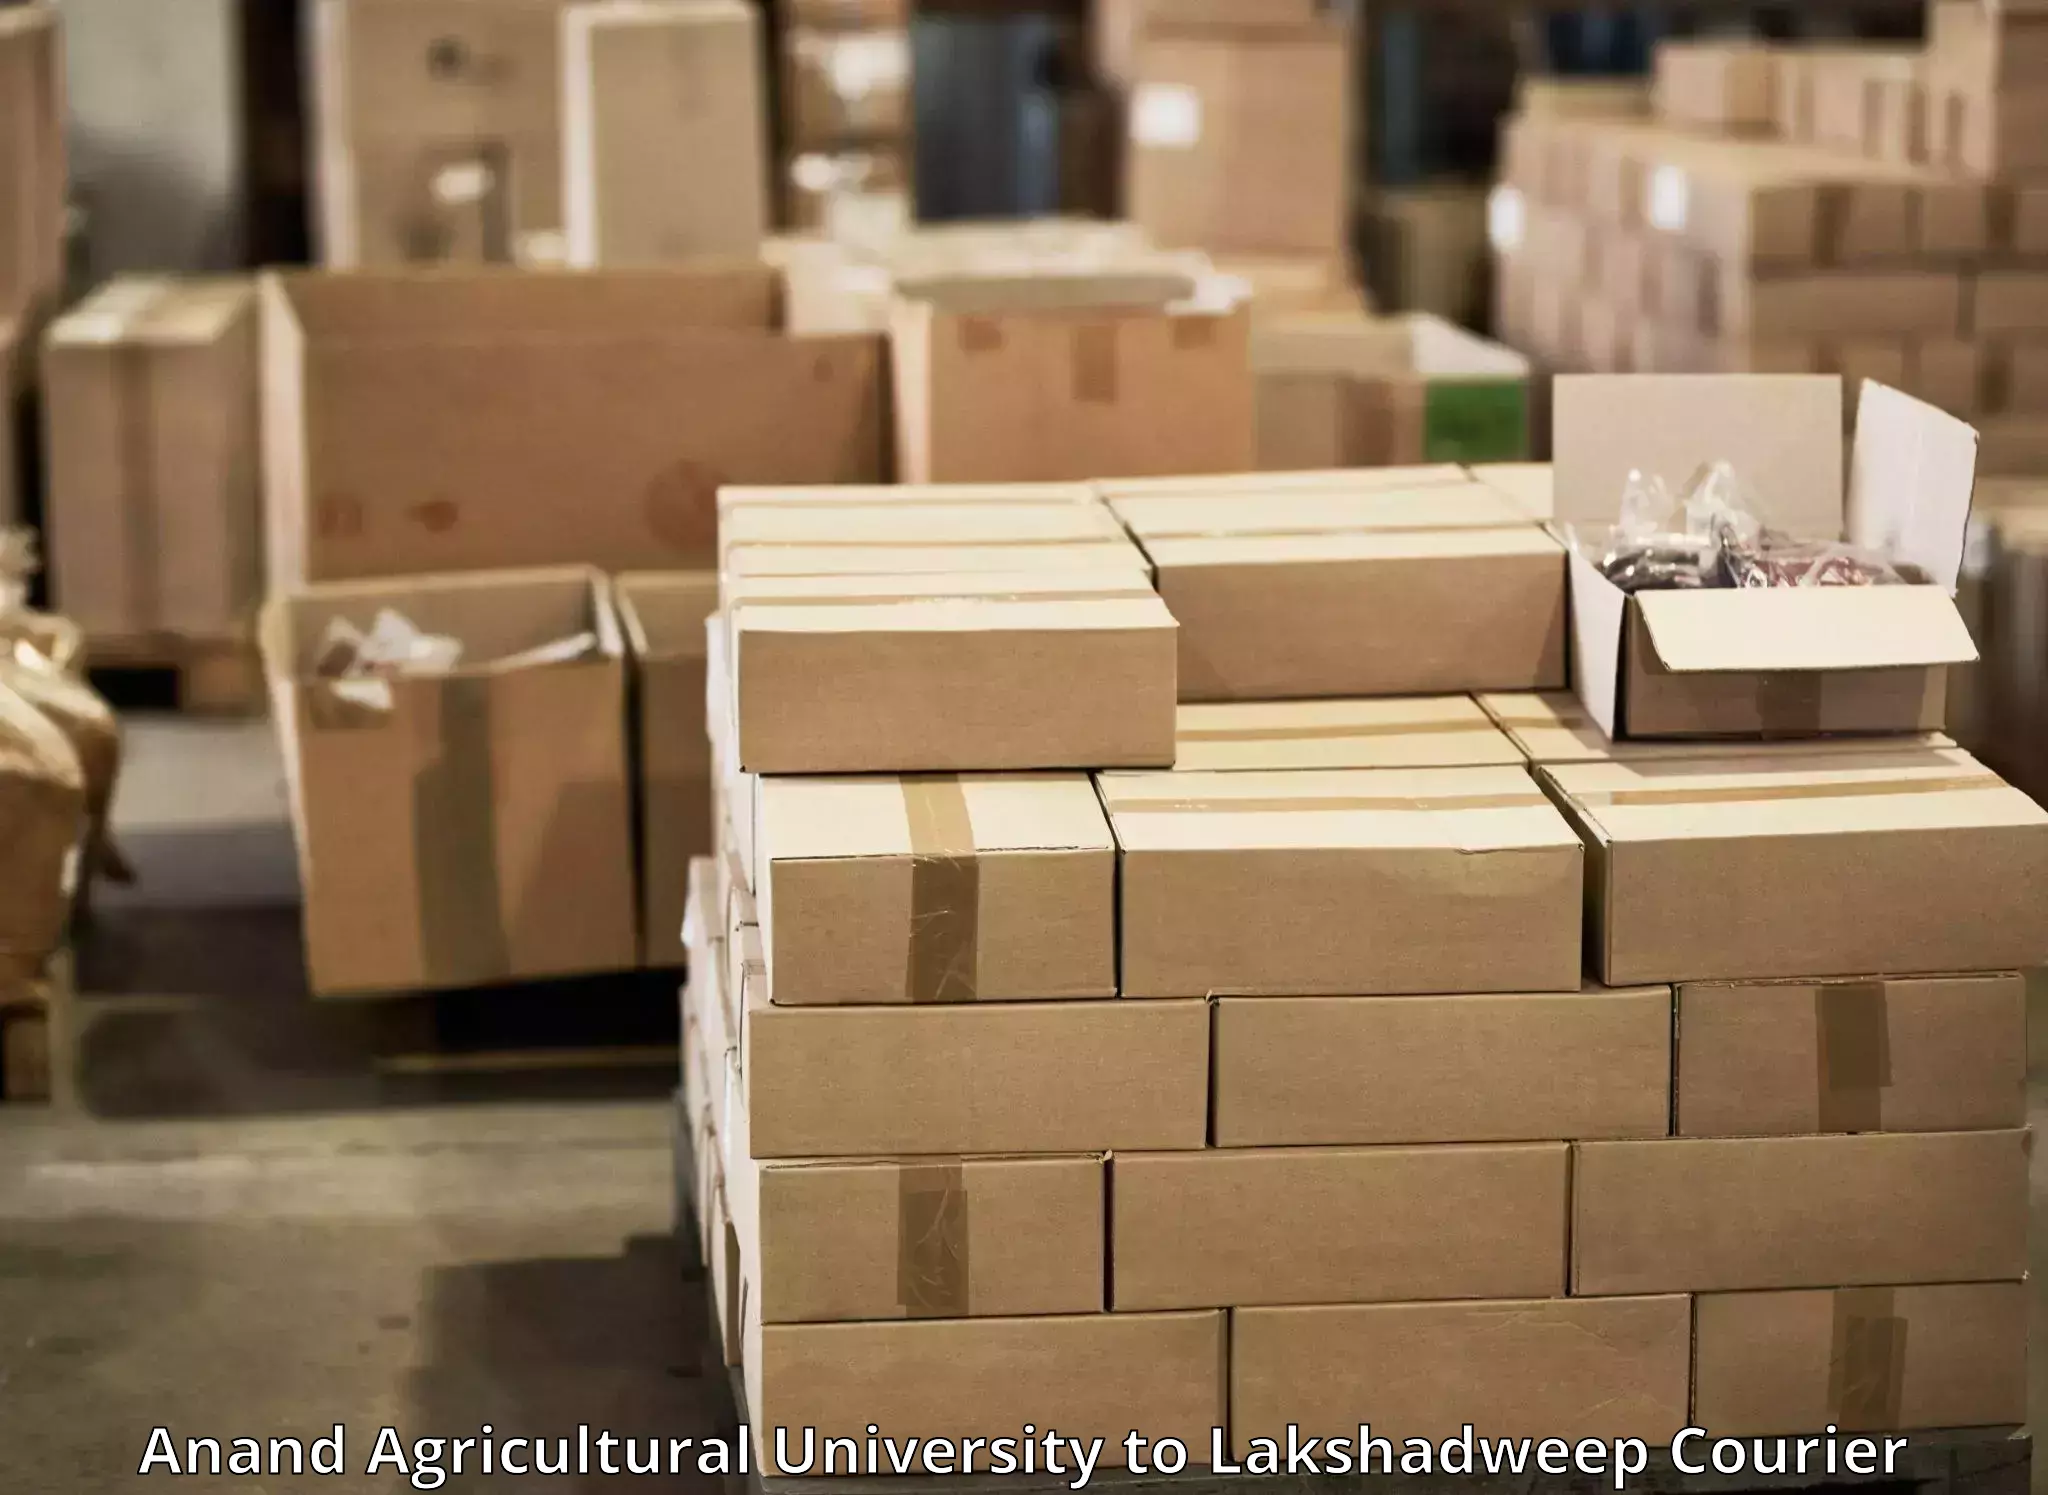 Online courier booking Anand Agricultural University to Lakshadweep